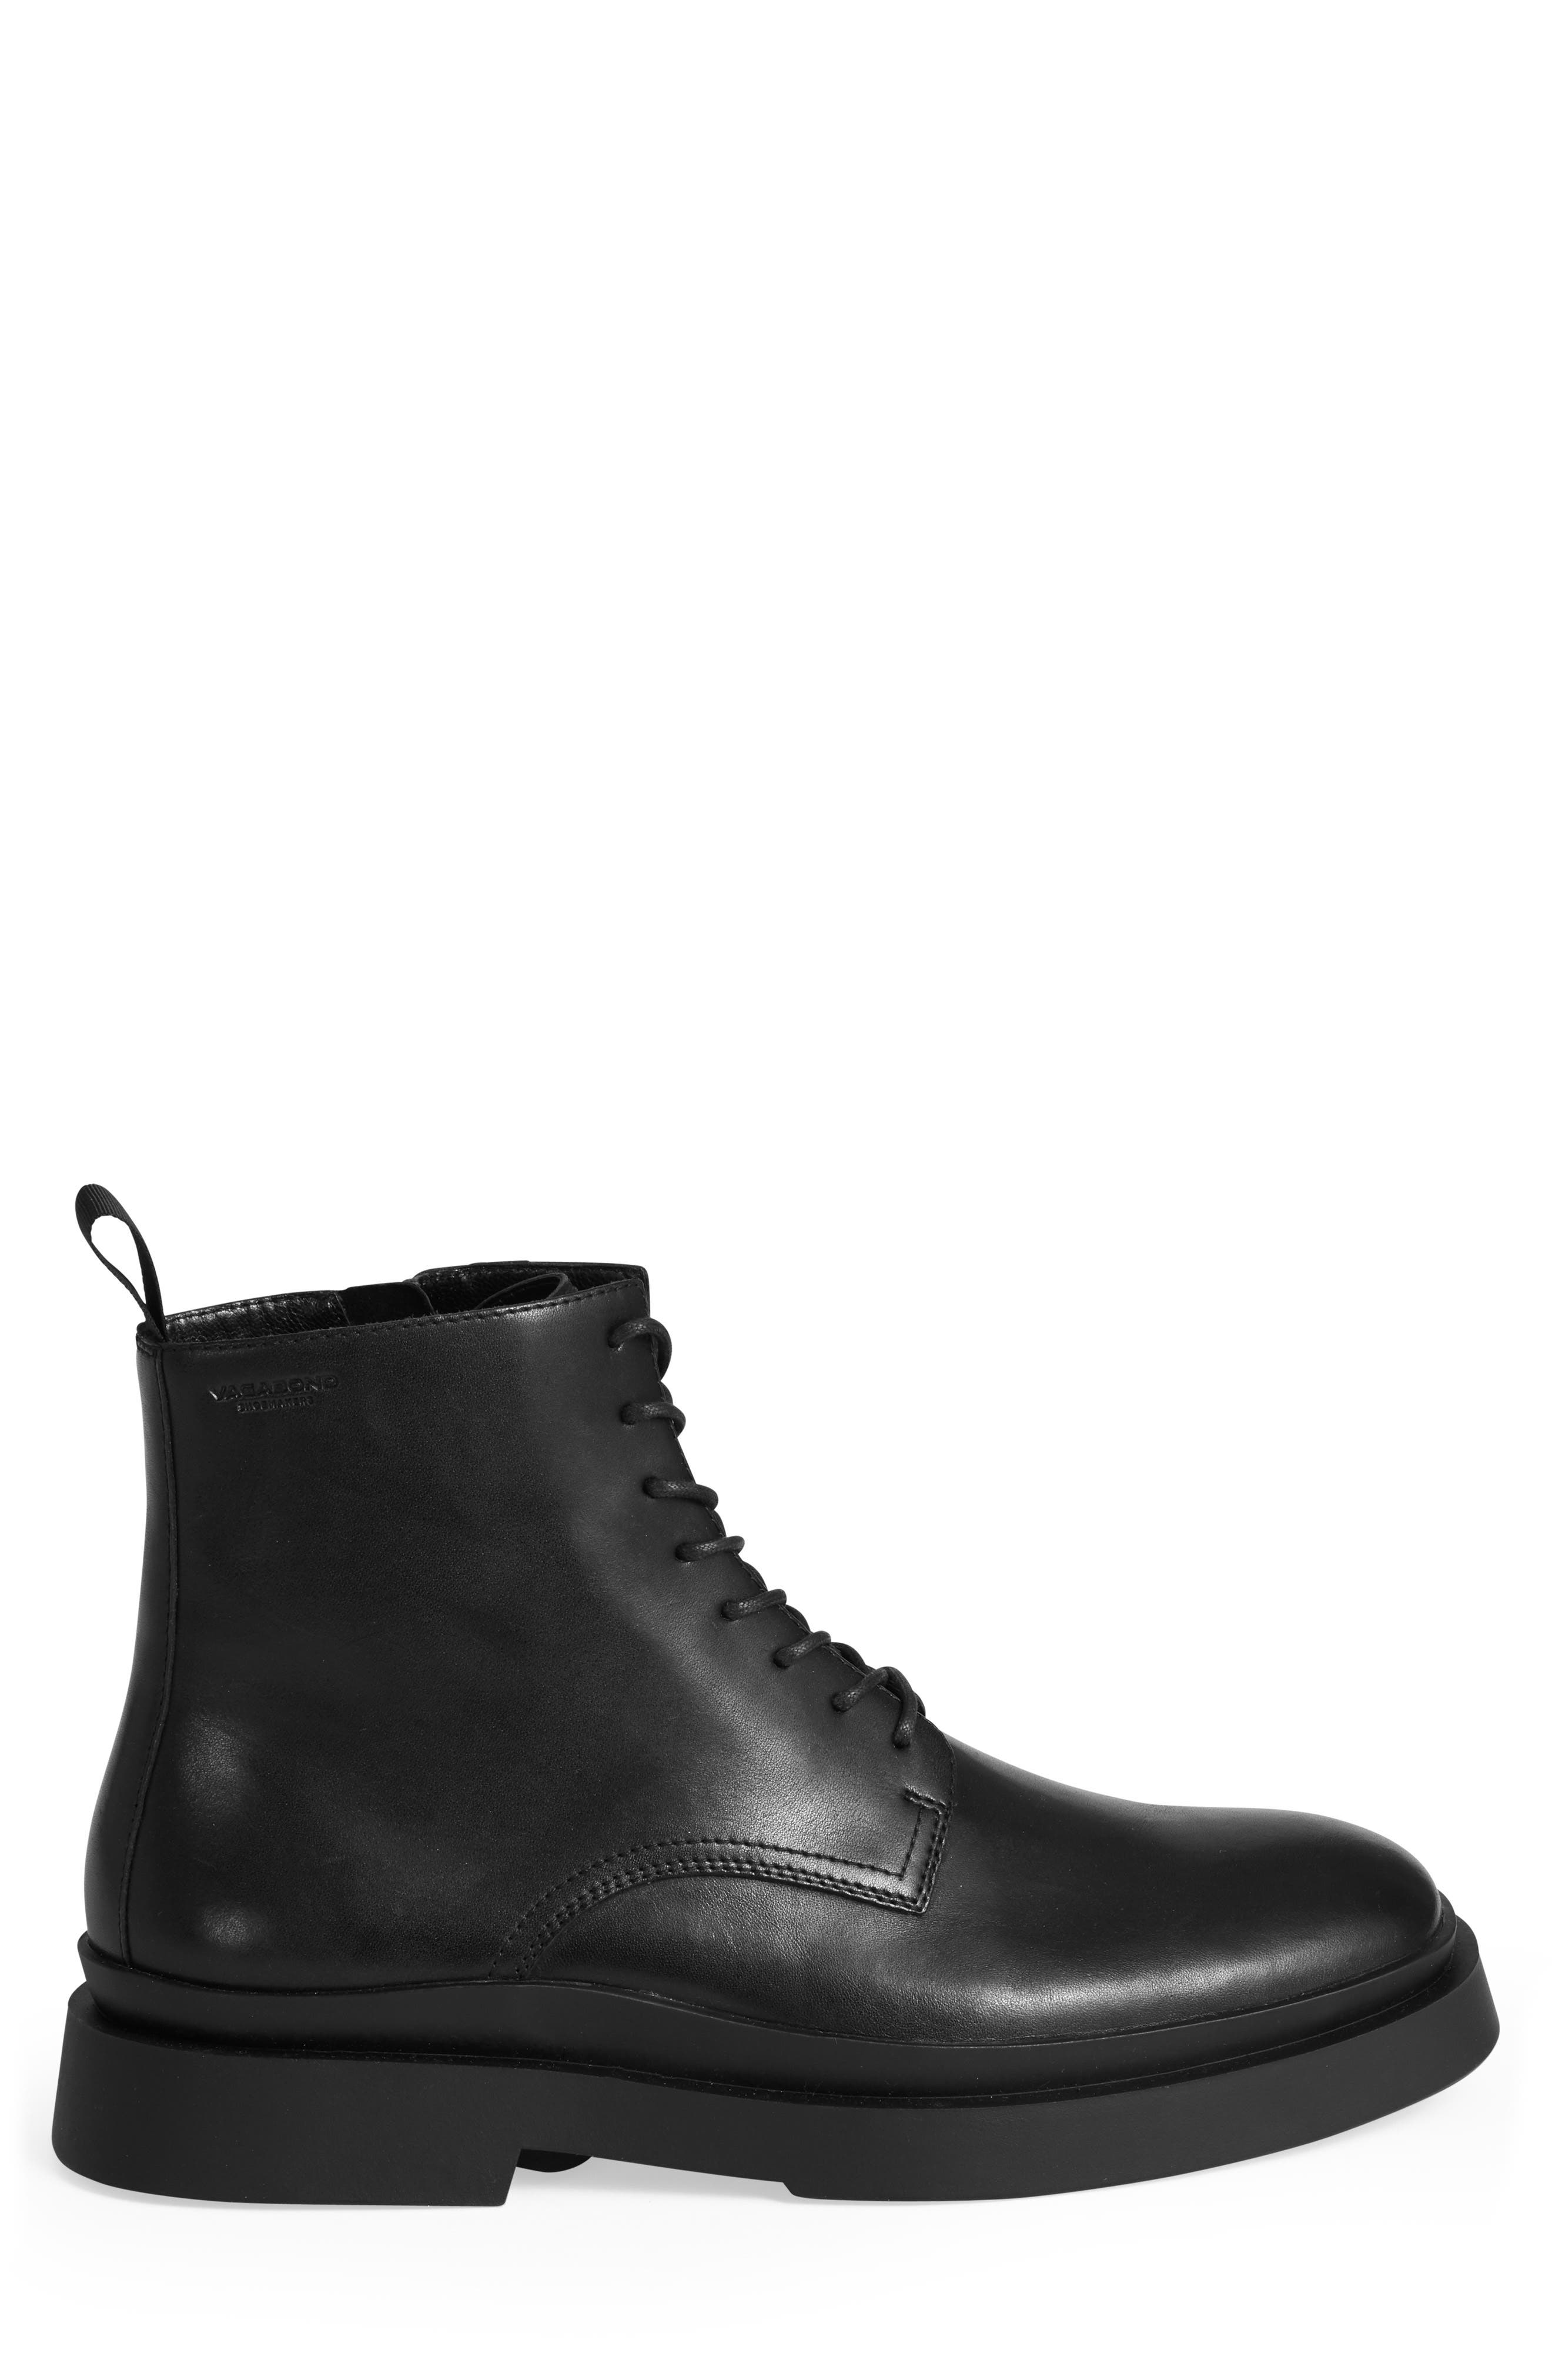 Vagabond Shoemakers Mike Boot in Black | Smart Closet